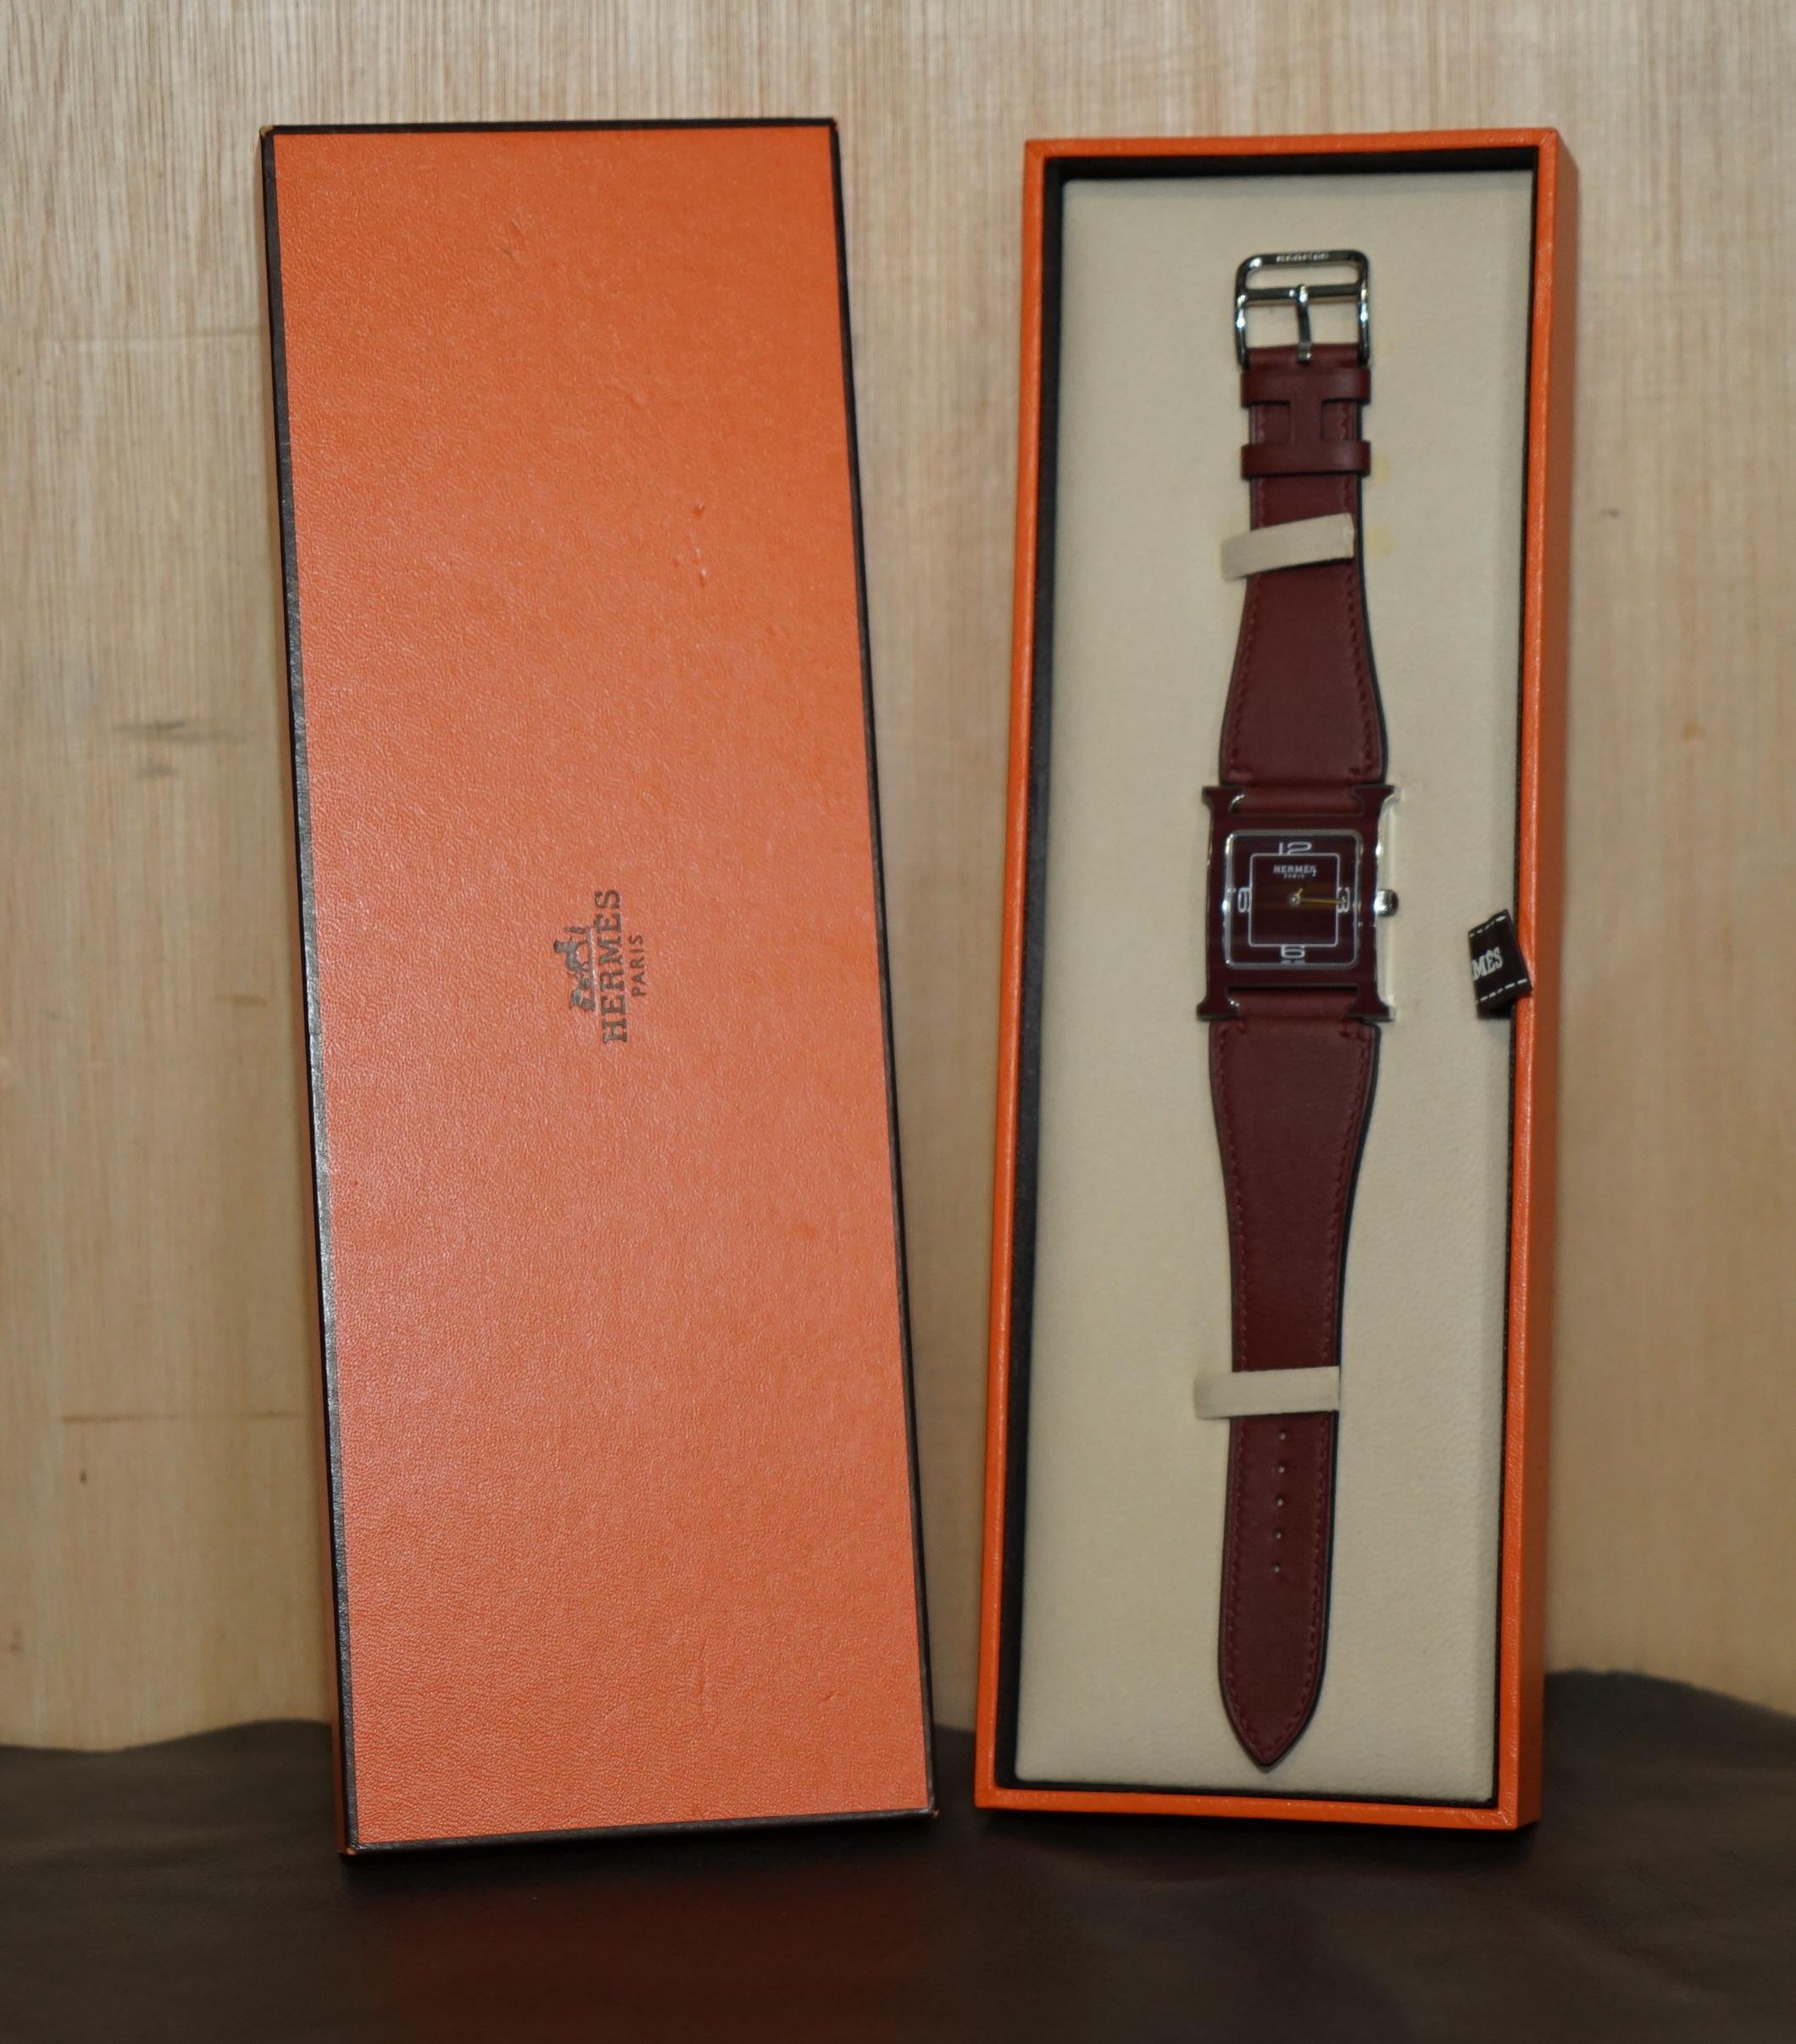 Art Deco BRAND NEW IN THE ORIGiNAL BOX WITH PAPERWORK HERMES PARIS LTD EDITION H WATCH For Sale